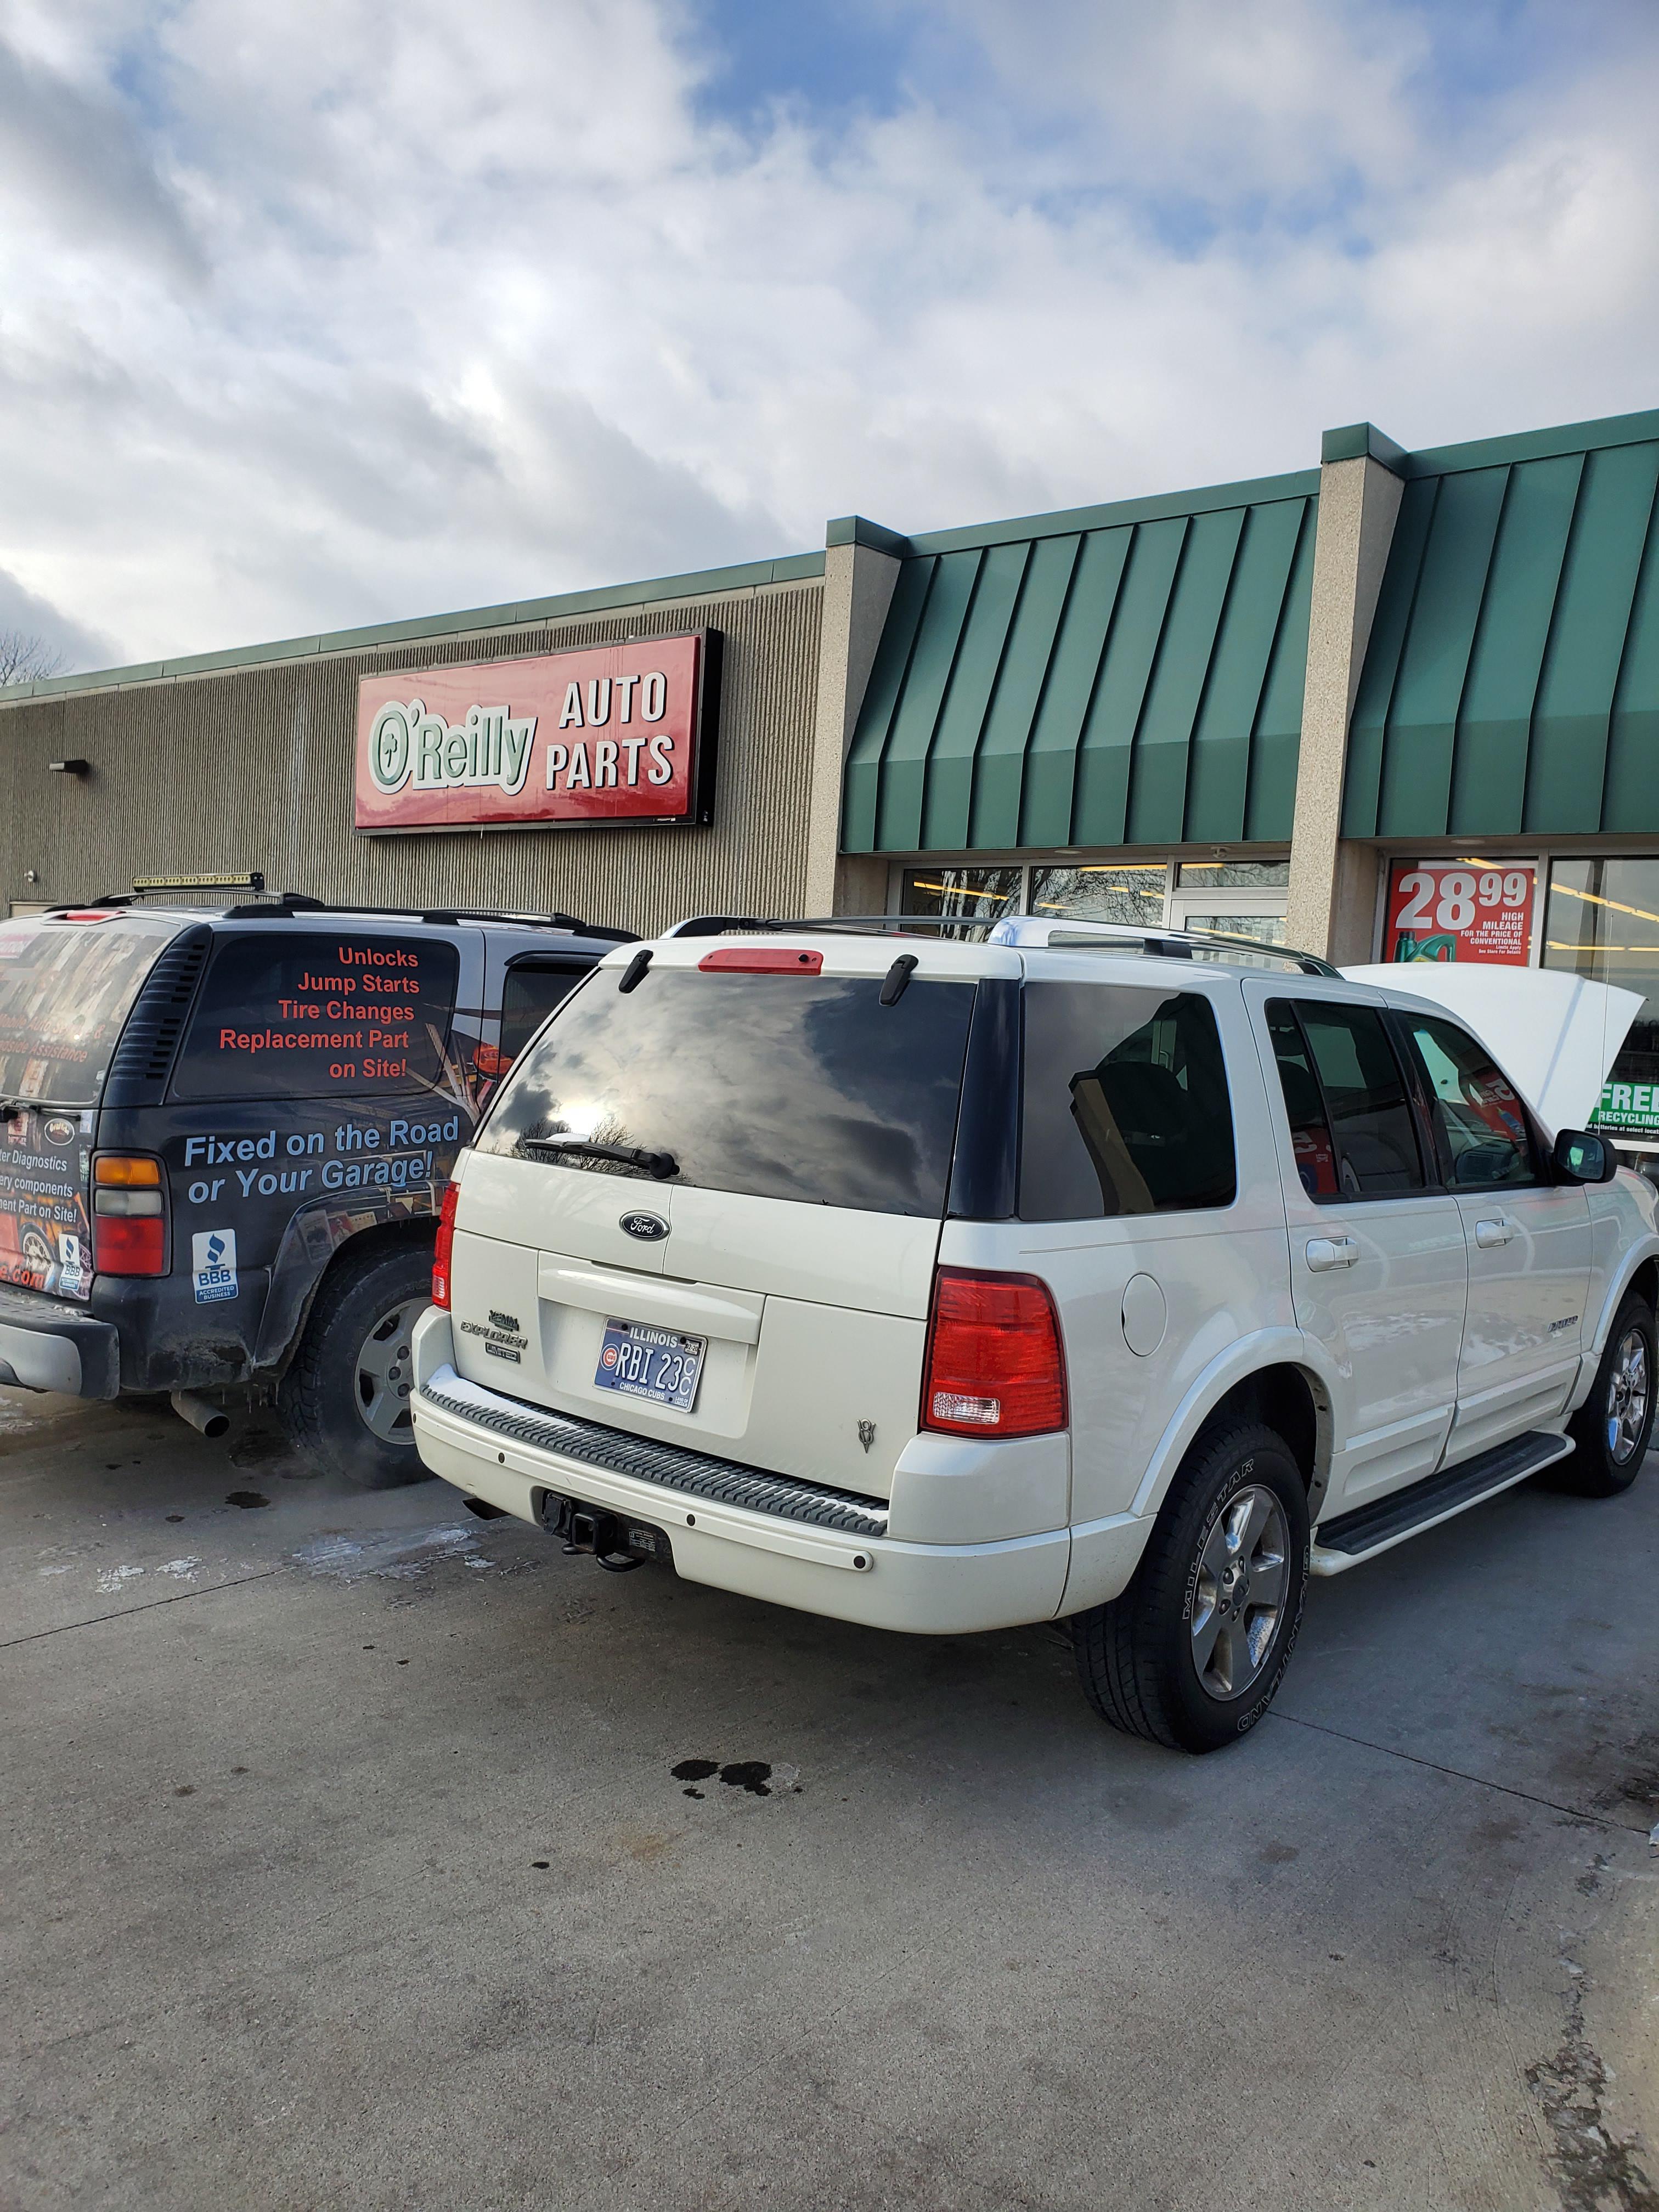 Alternator Replacement by Fast T's on a Ford Explorer at Oriellys in Clive, IA.